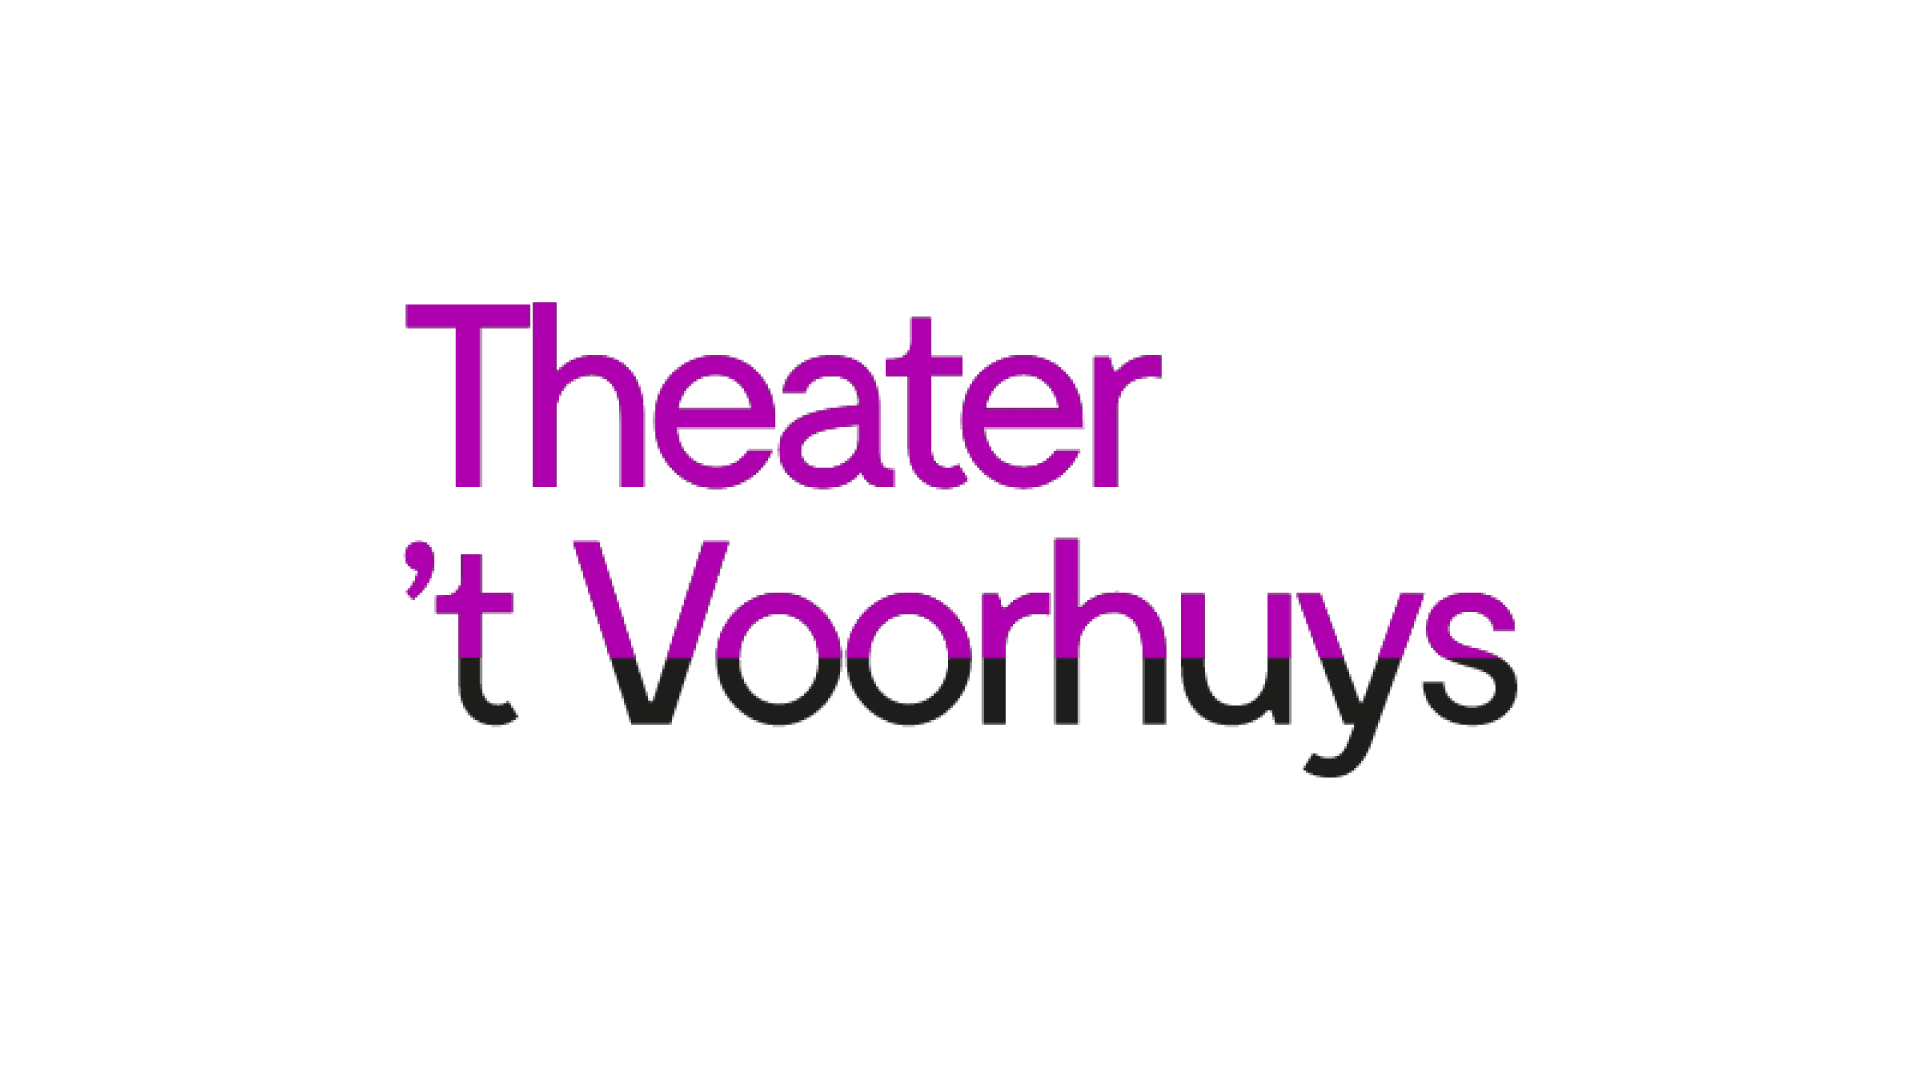 Theater 't Voorhuys